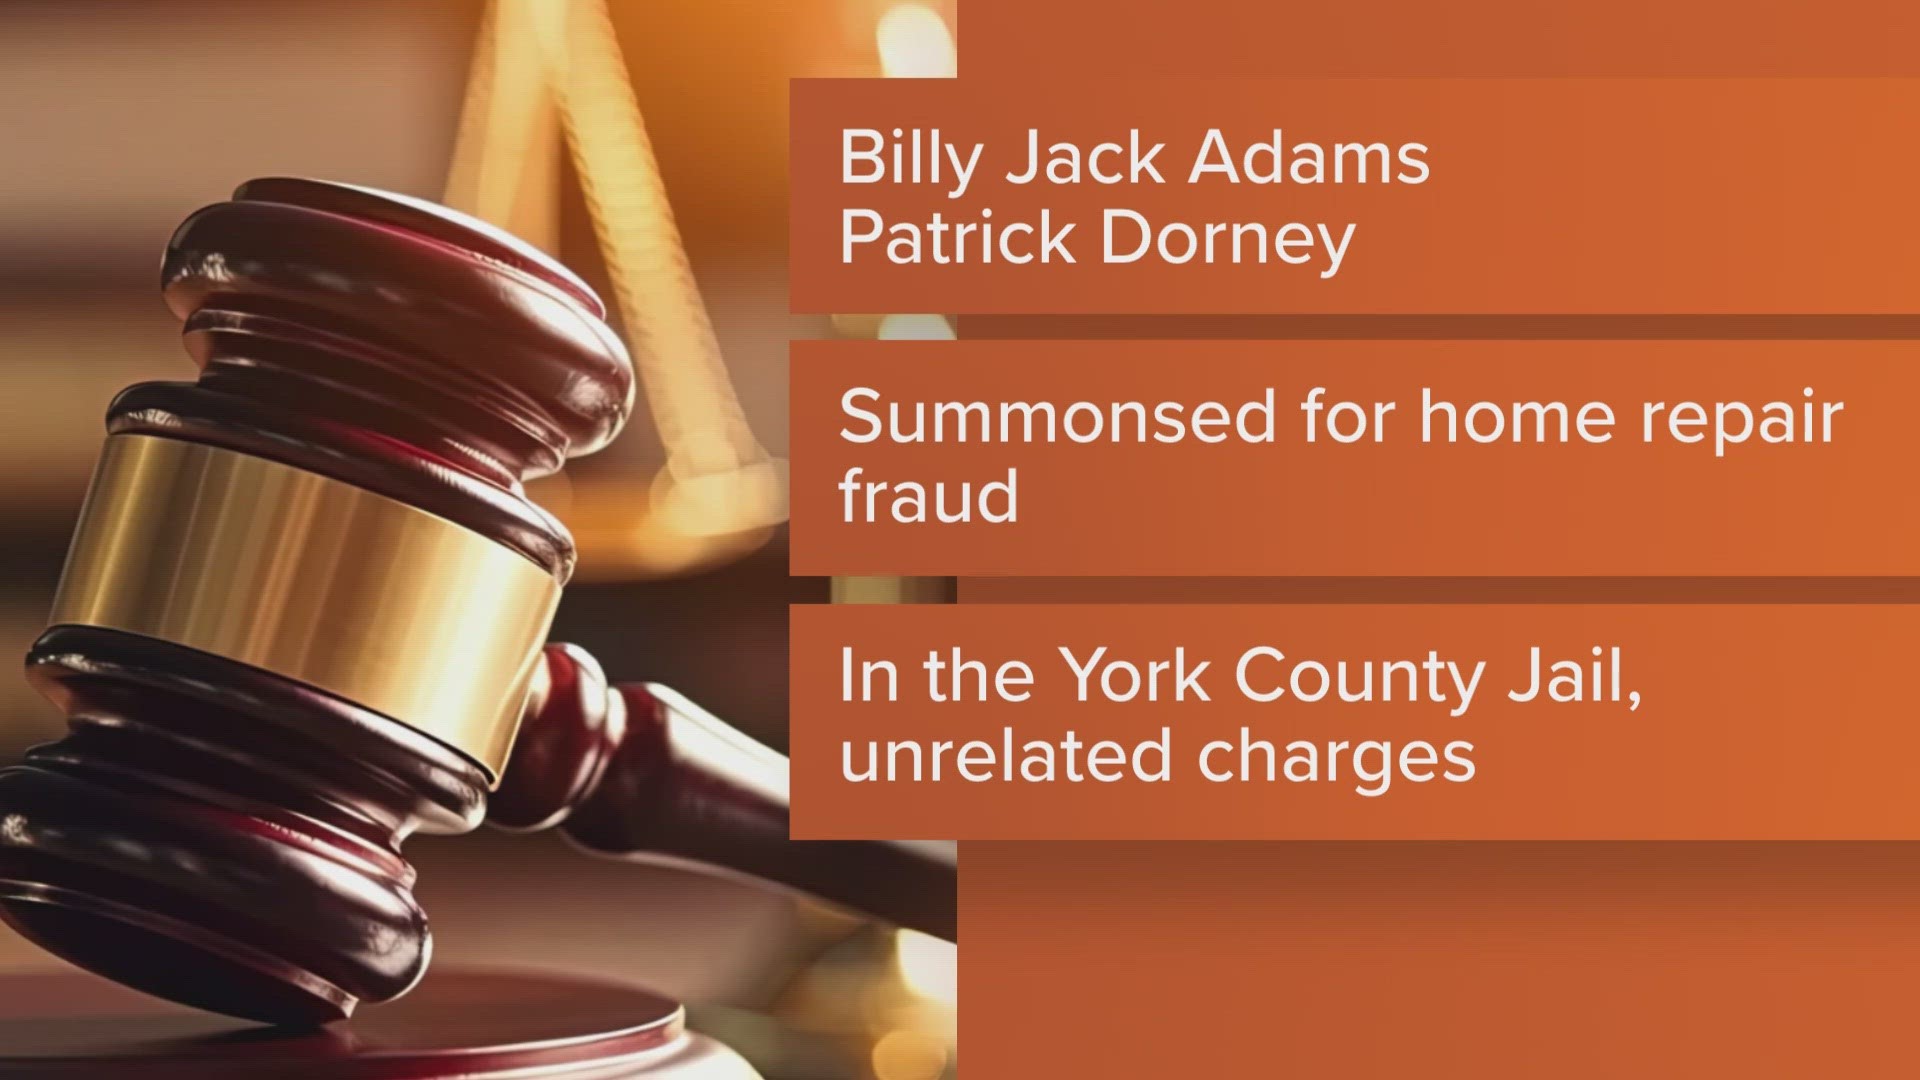 Billy Jack Adams and Patrick Dorney are in the York County Jail. They're facing charges for home repair fraud.